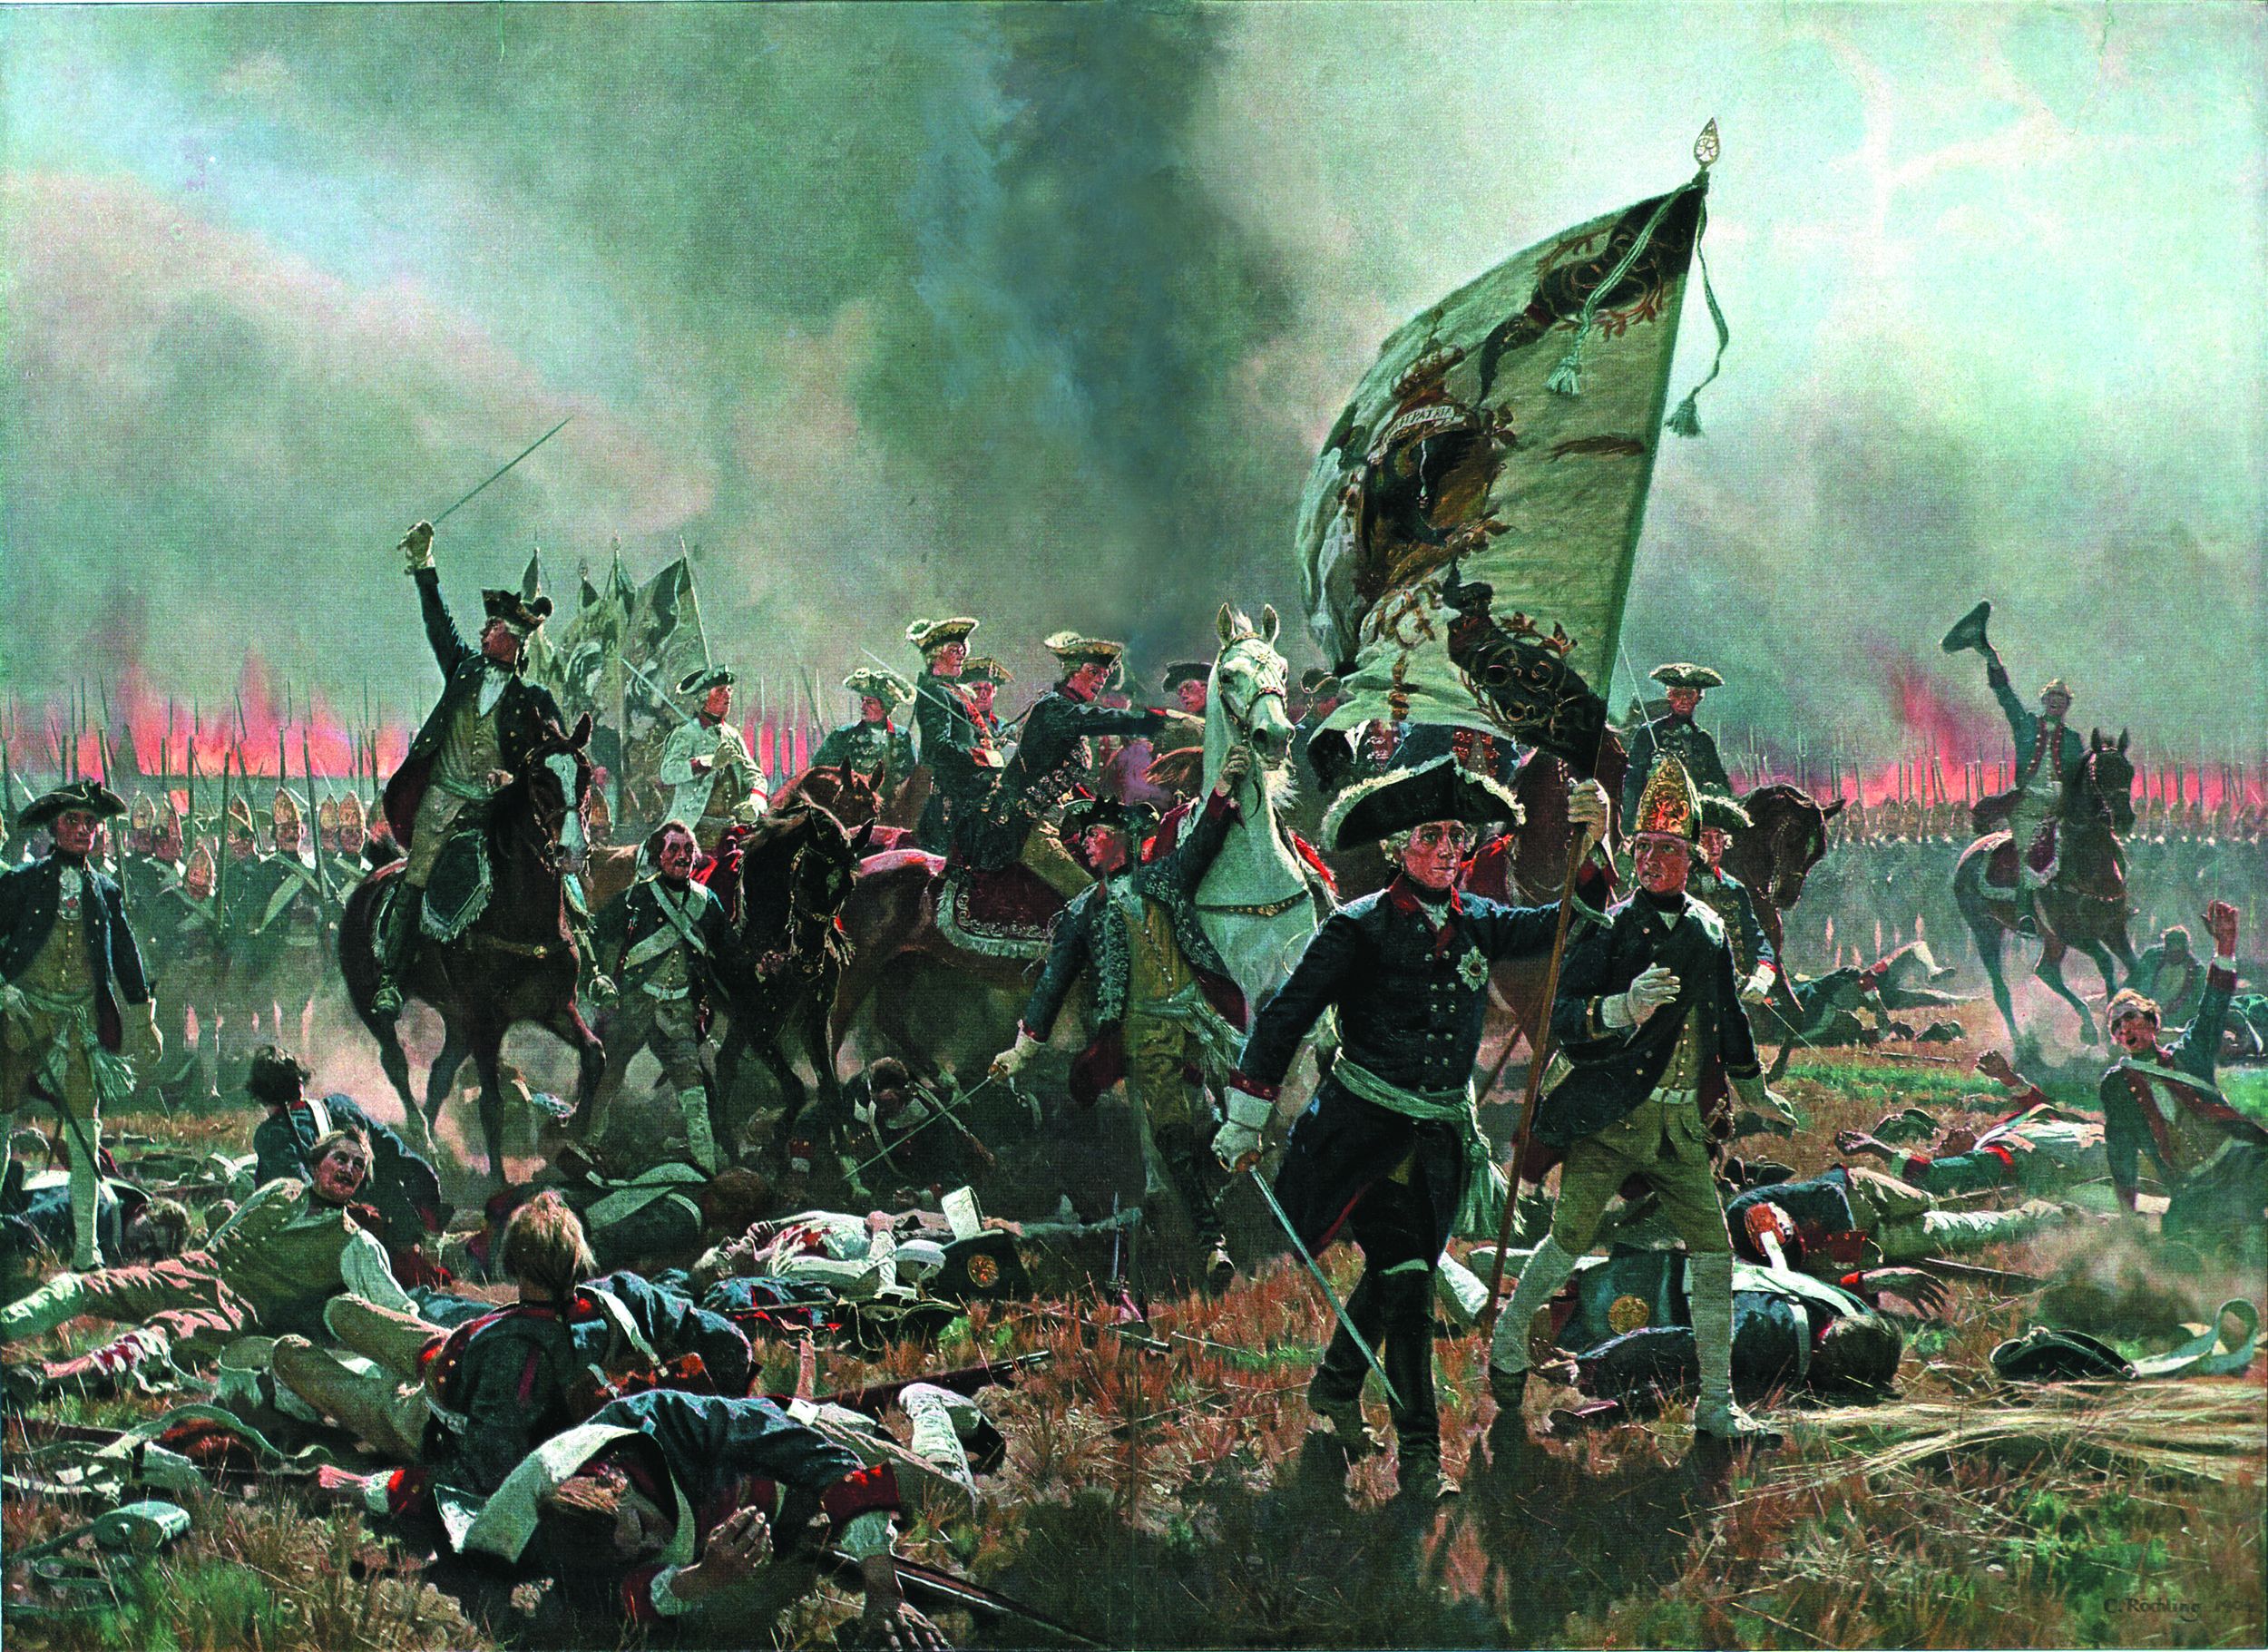 Clutching the colors of the 46th Infantry Regiment, Frederick rallies his men to a last-ditch stand on the Prussian left. Seydlitz’s cavalry would save the day.